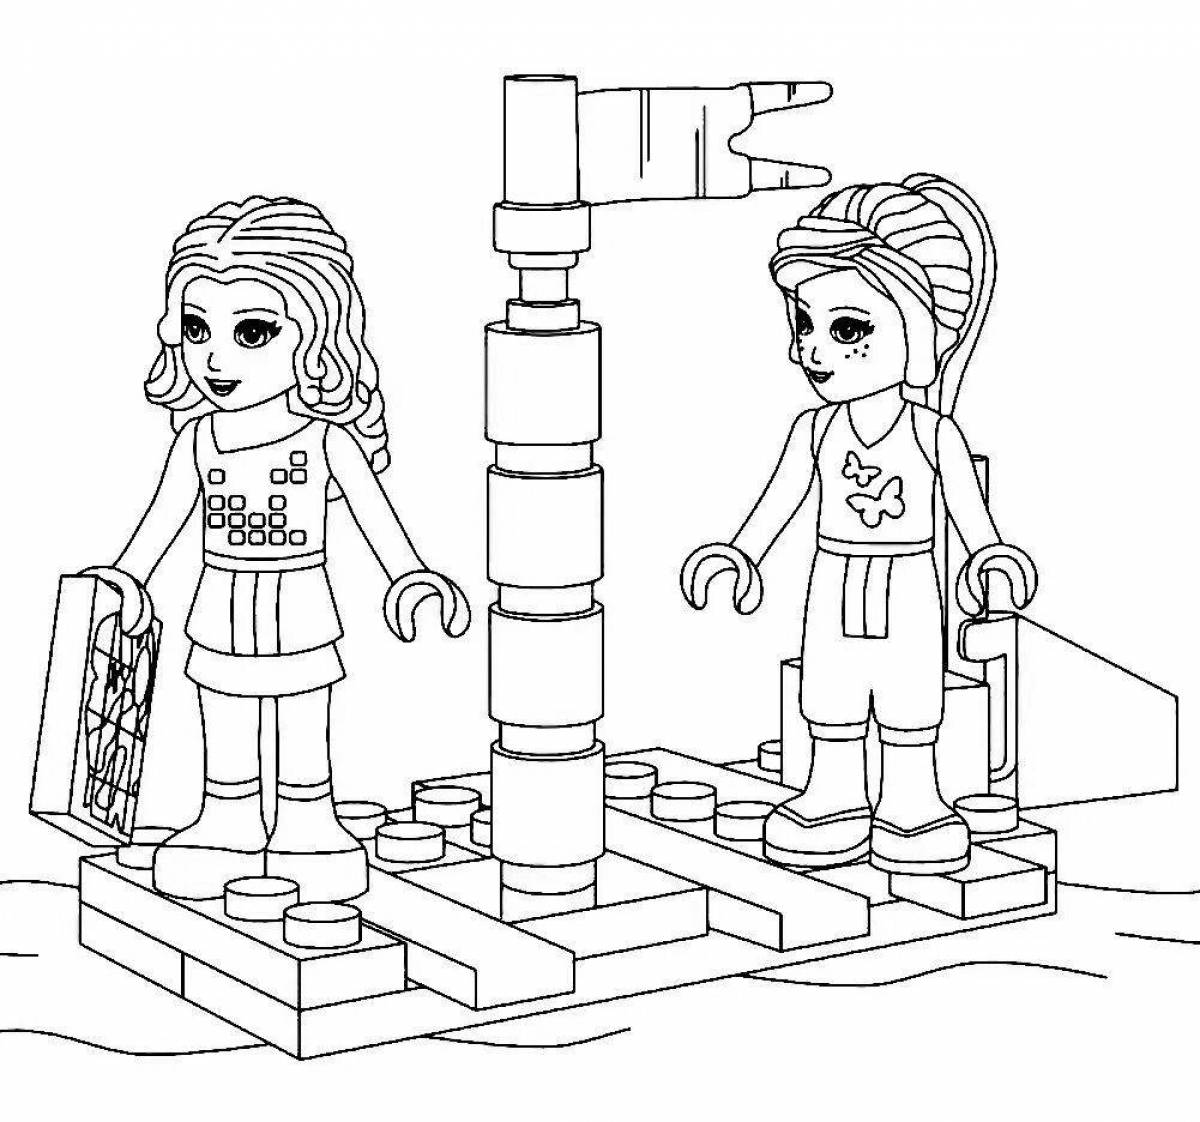 Fairy lego friends coloring page